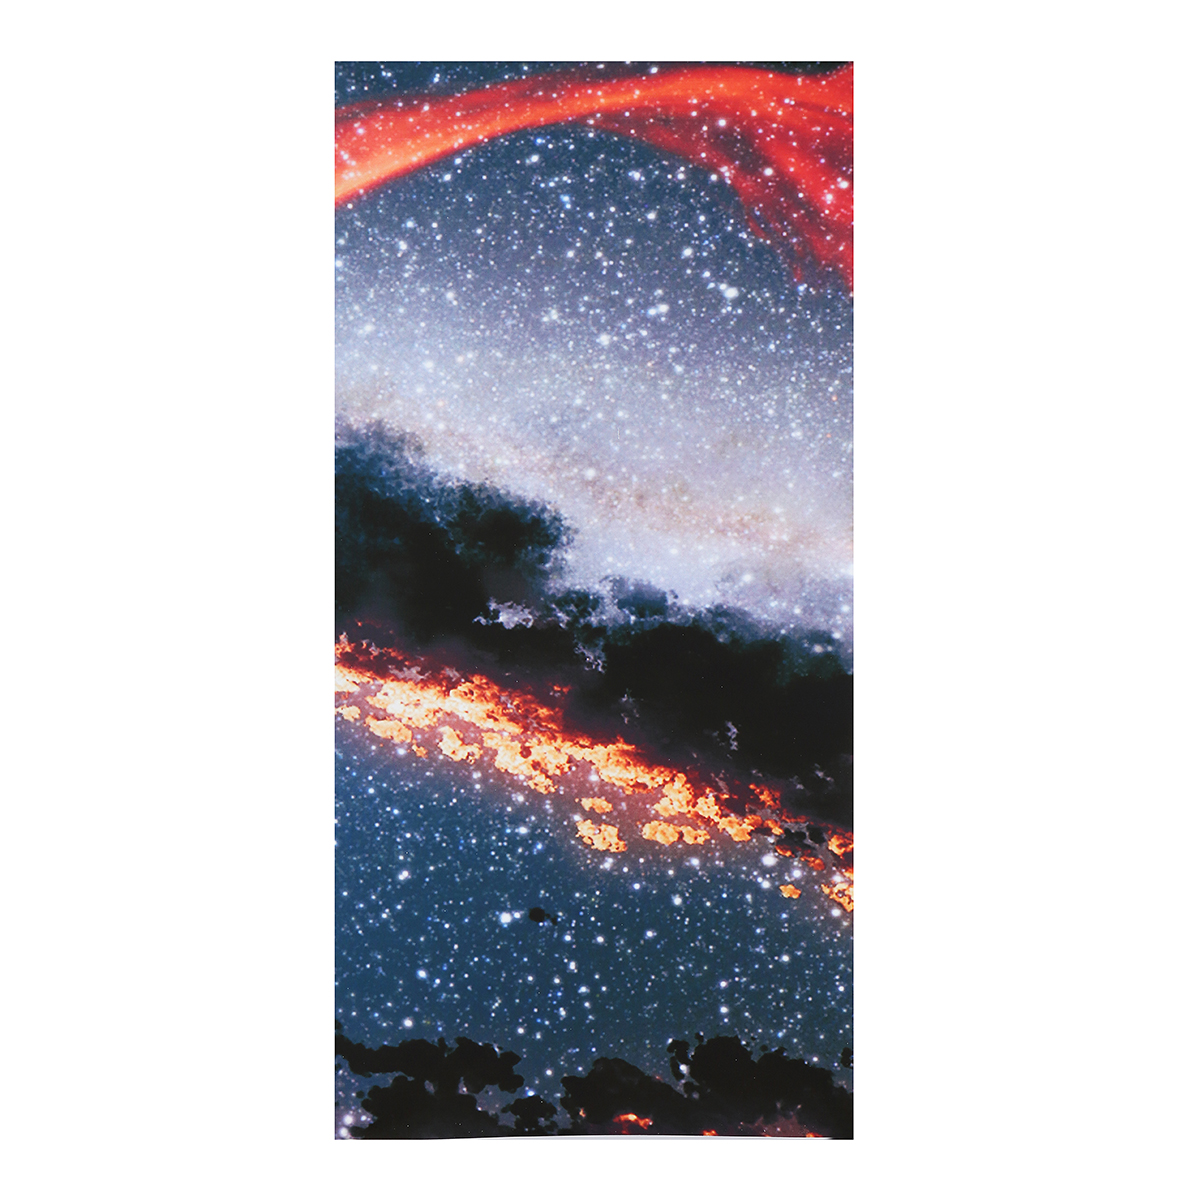 5Pcs-Canvas-Painting-Starry-Sky-Wall-Decorative-Print-Art-Pictures-Frameless-Wall-Hanging-Home-Offic-1803048-8